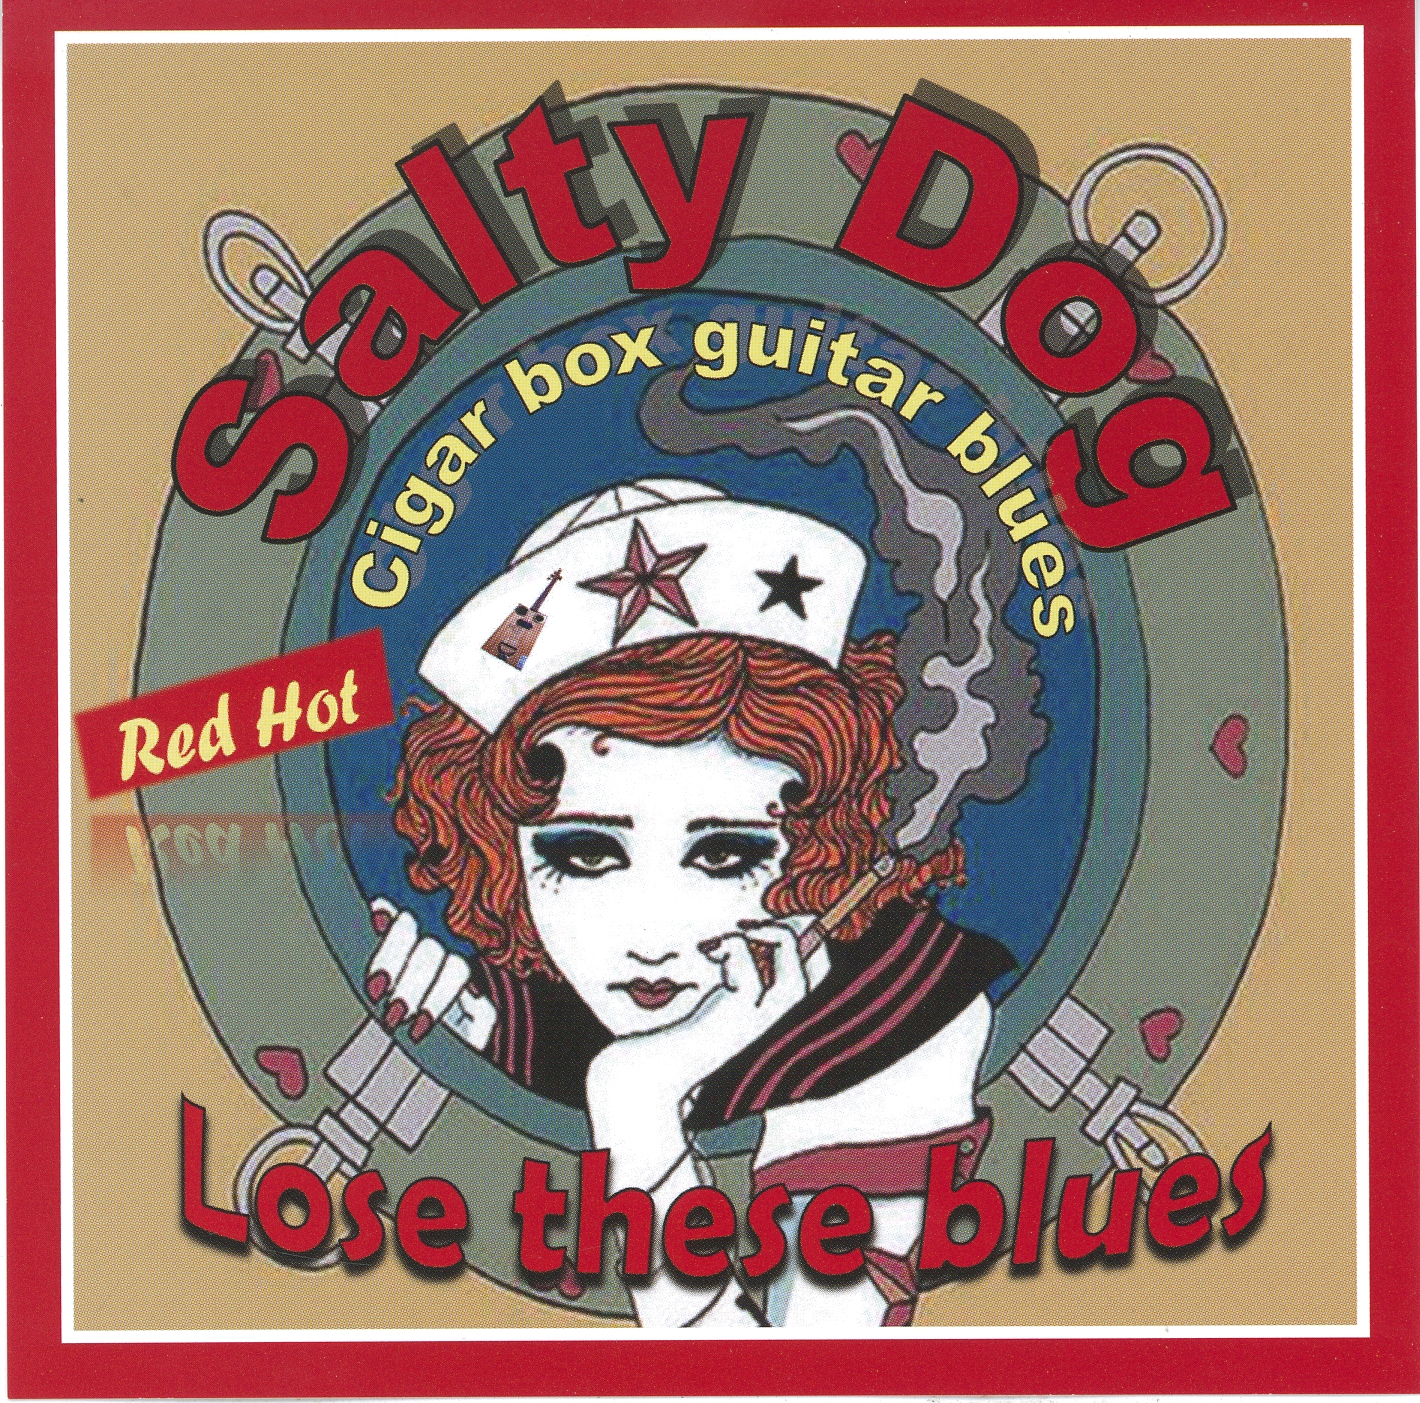 Salty Dog - Lose These Blues